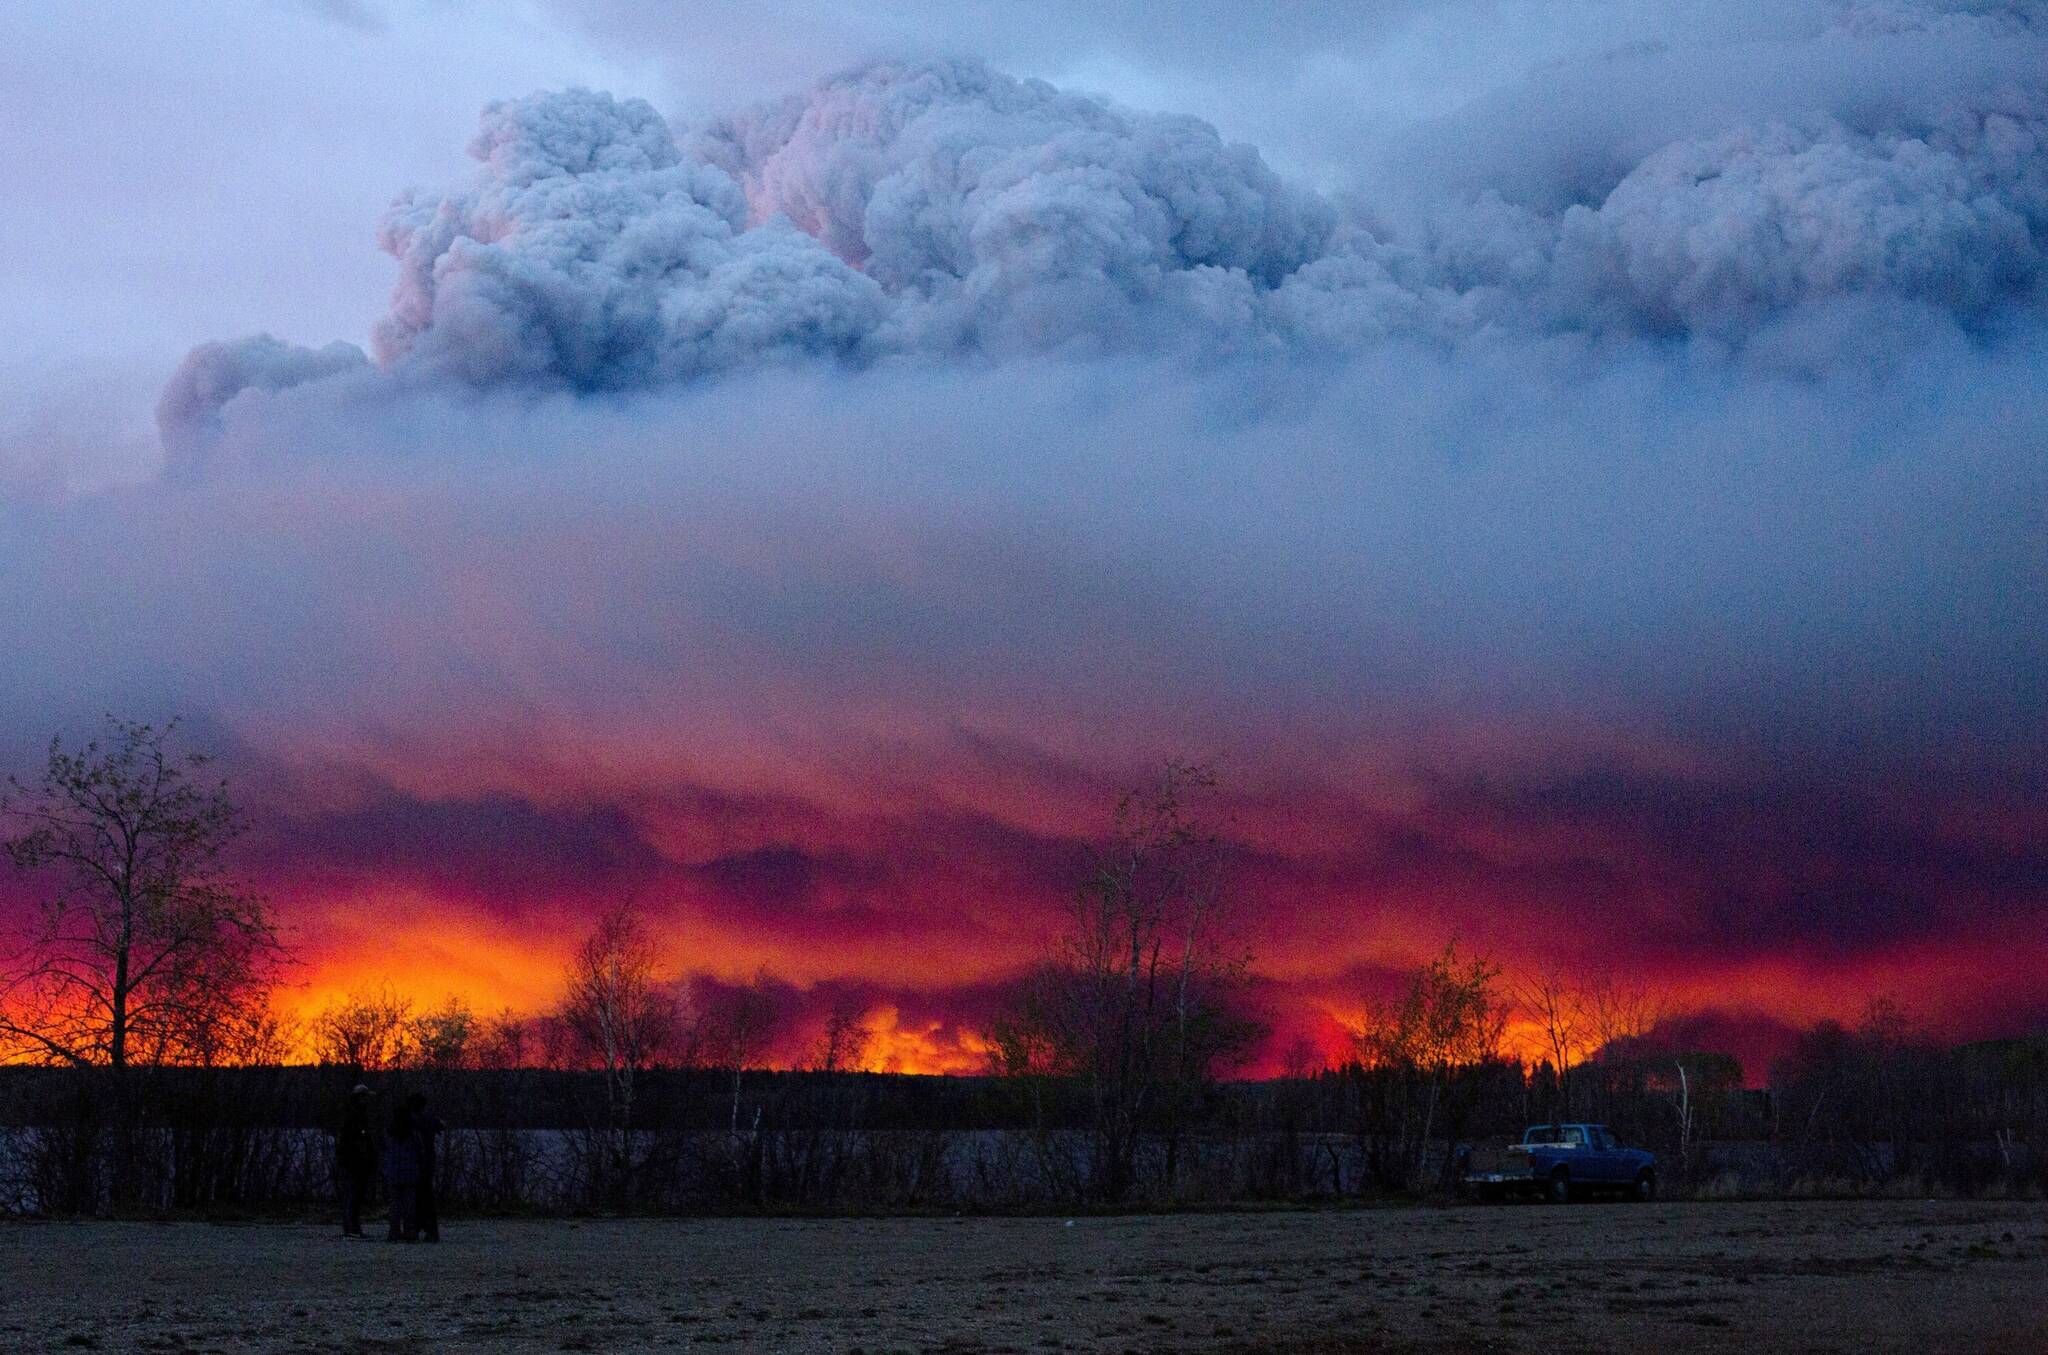 A wildfire moves towards the town of Anzac from Fort McMurray, Alberta., on May 4, 2016. Smoke from boreal fires in 2021 contributed the most to global fire CO2 emissions since 2000, according to a new study in Science being released with a press briefing at the annual AAAS meeting. Using satellite-based atmospheric measurements, researchers from around the world determined that boreal fire smoke made up 23% of global fire CO2 emissions when it typically accounts for 10% of these emissions. (Jason Franson/The Canadian Press via AP, file)